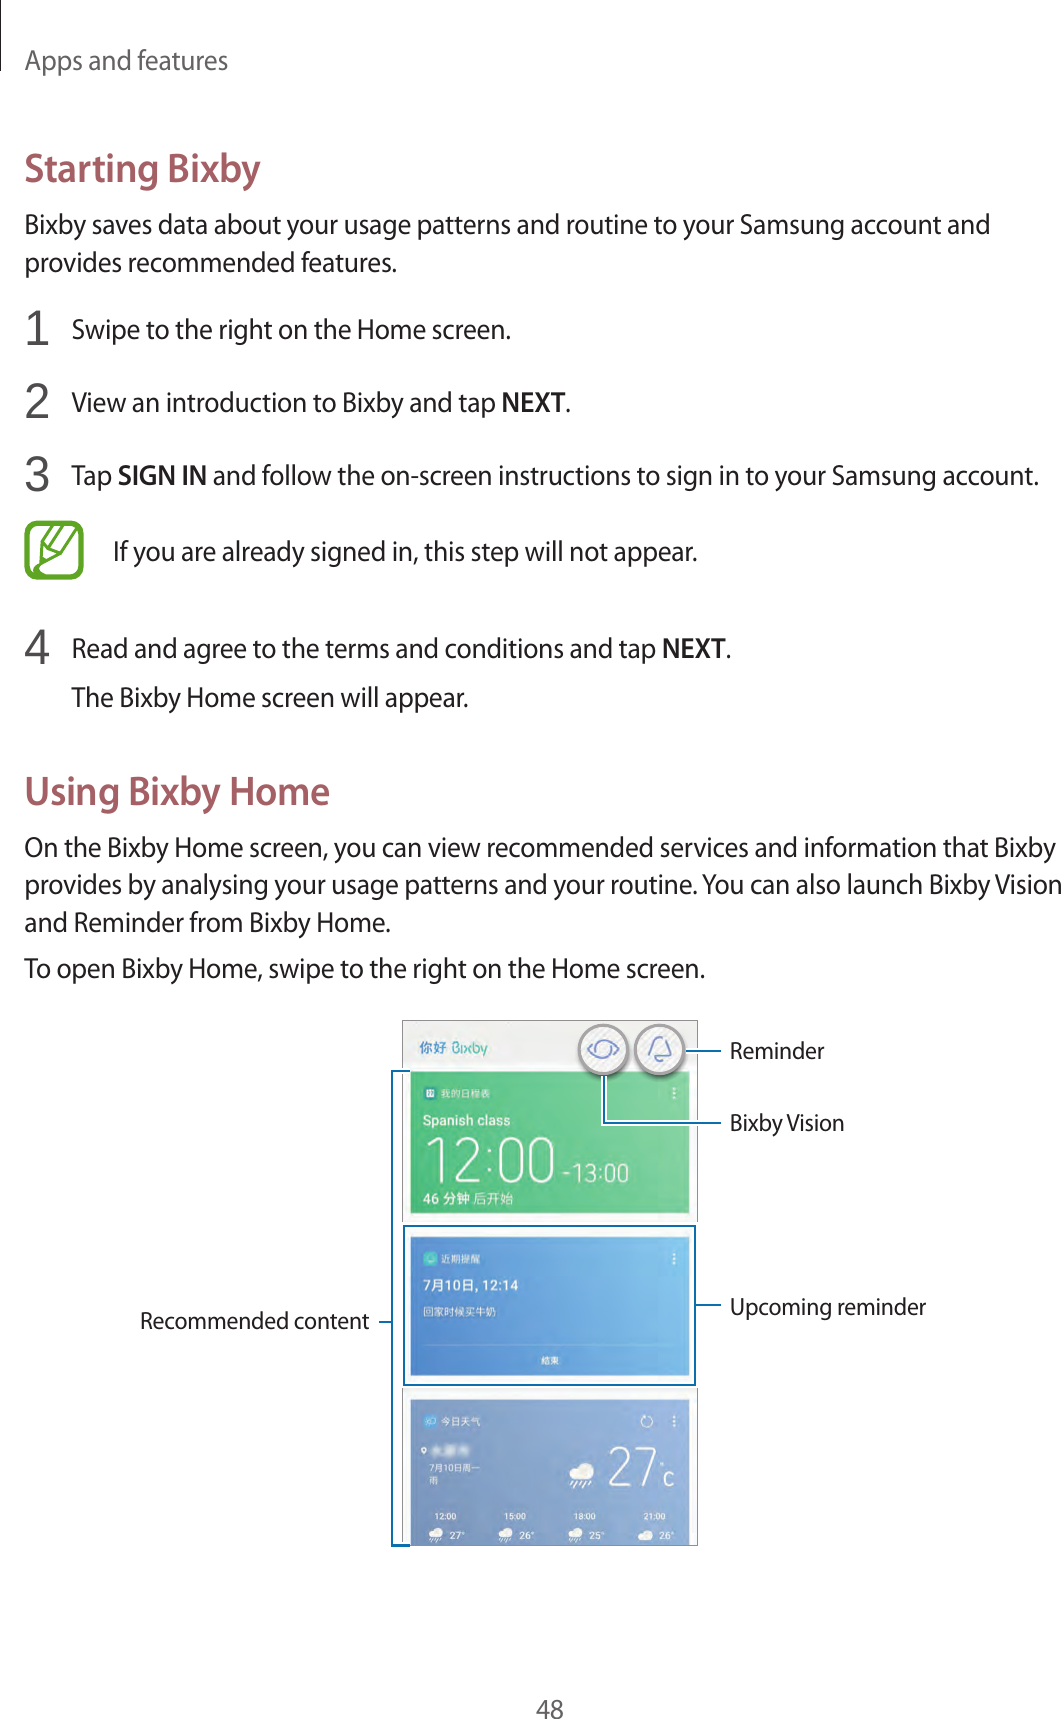 Apps and features48Starting BixbyBixby saves data about your usage patterns and routine to your Samsung account and provides recommended features.1  Swipe to the right on the Home screen.2  View an introduction to Bixby and tap NEXT.3  Tap SIGN IN and follow the on-screen instructions to sign in to your Samsung account.If you are already signed in, this step will not appear.4  Read and agree to the terms and conditions and tap NEXT.The Bixby Home screen will appear.Using Bixby HomeOn the Bixby Home screen, you can view recommended services and information that Bixby provides by analysing your usage patterns and your routine. You can also launch Bixby Vision and Reminder from Bixby Home.To open Bixby Home, swipe to the right on the Home screen.Bixby VisionUpcoming reminderRecommended contentReminder